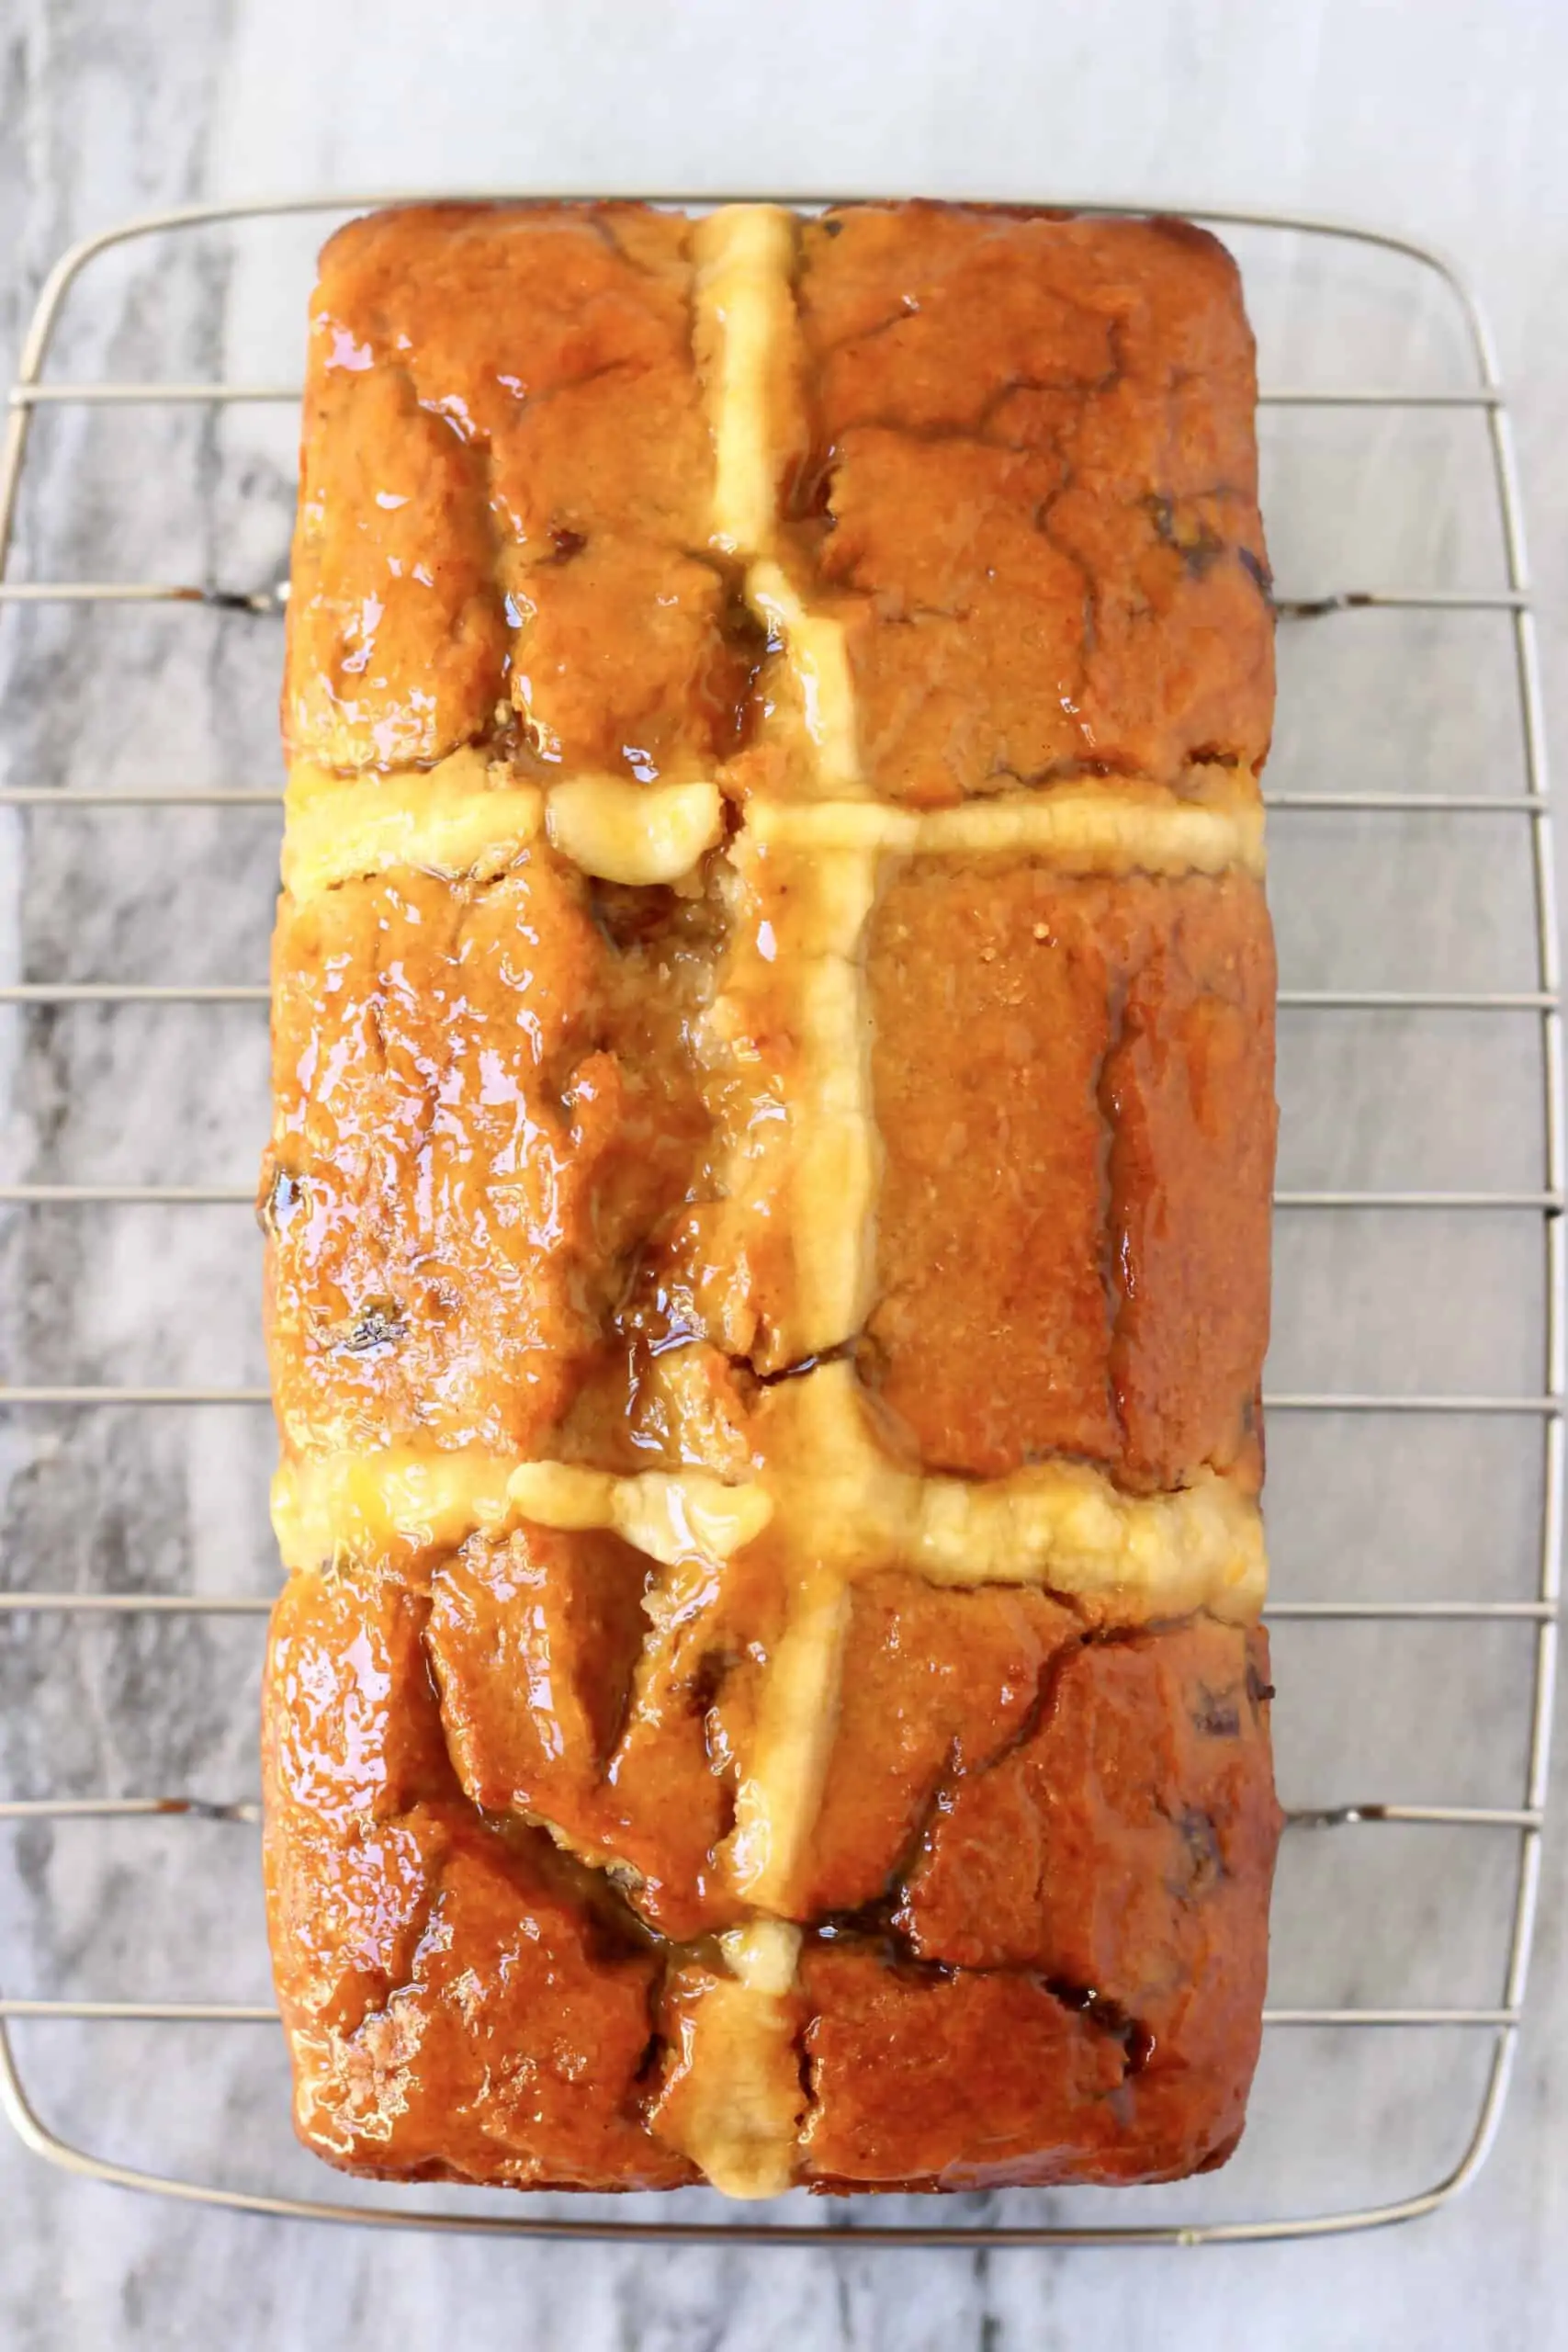 A gluten-free vegan hot cross bun loaf spread with apricot jam on a wire rack